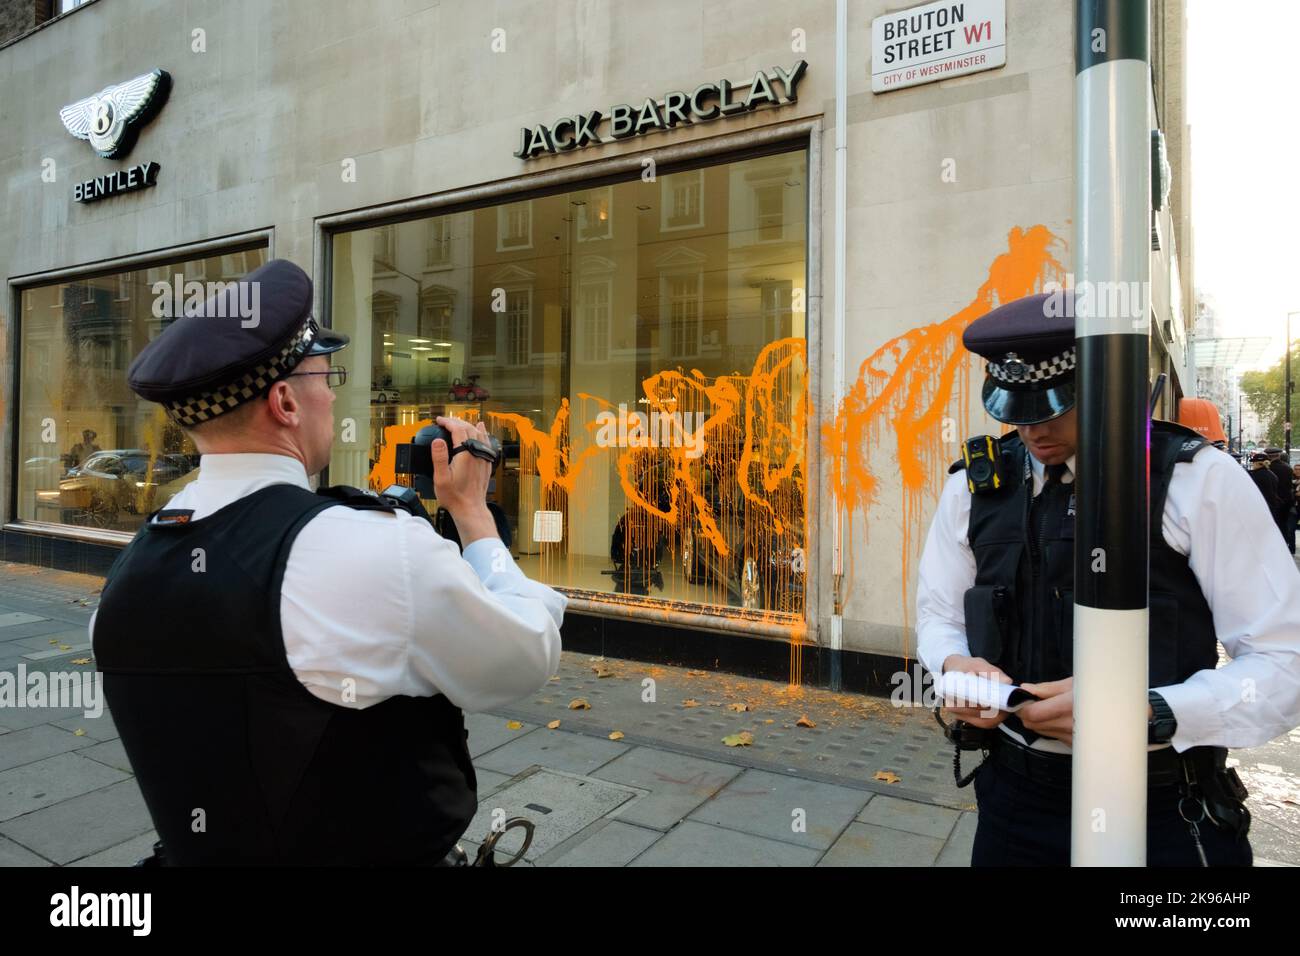 London, UK. 26 OCT 2022. A couple of Just Stop Oil activists spray-paint luxury car dealership in Mayfair. The climate protesters targeted H.R. Owen, Jack Barclay Bentley, and Ferrari Mayfair. Stock Photo